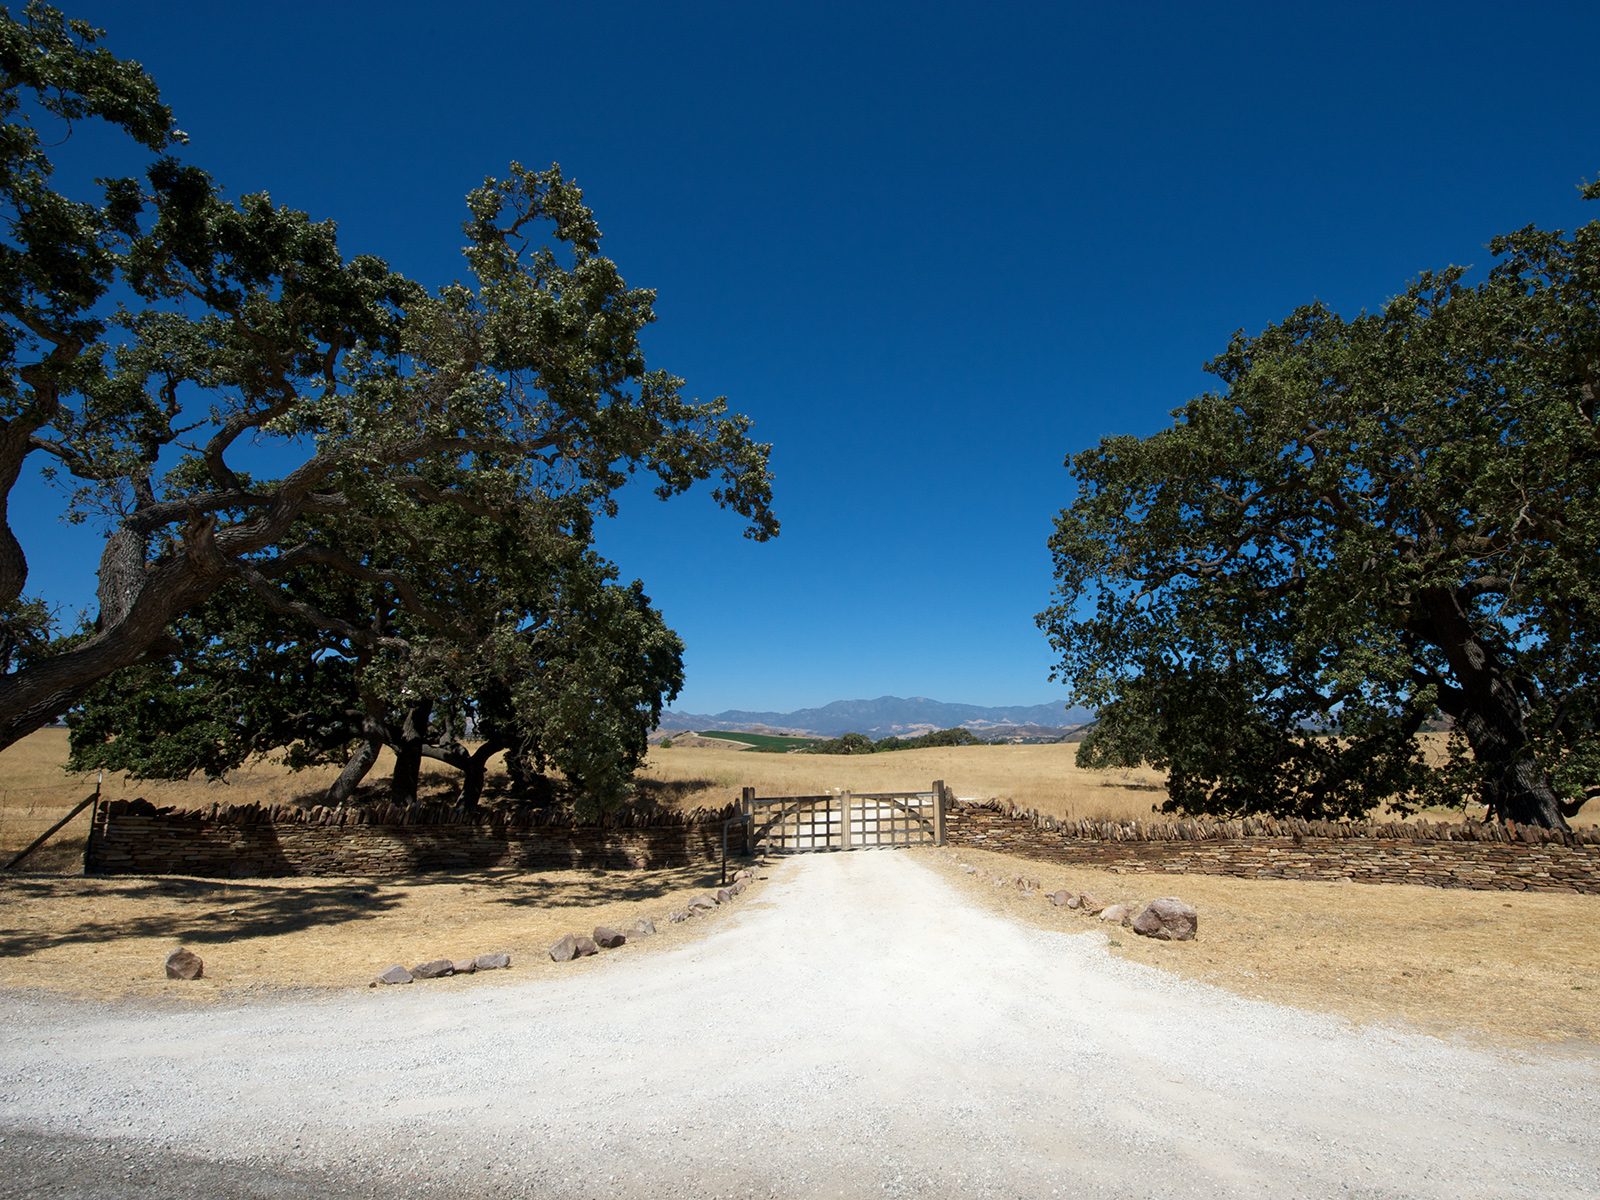 a wooden gate in the Santa Barbara countryside, outside of Los Angeles, California, USA